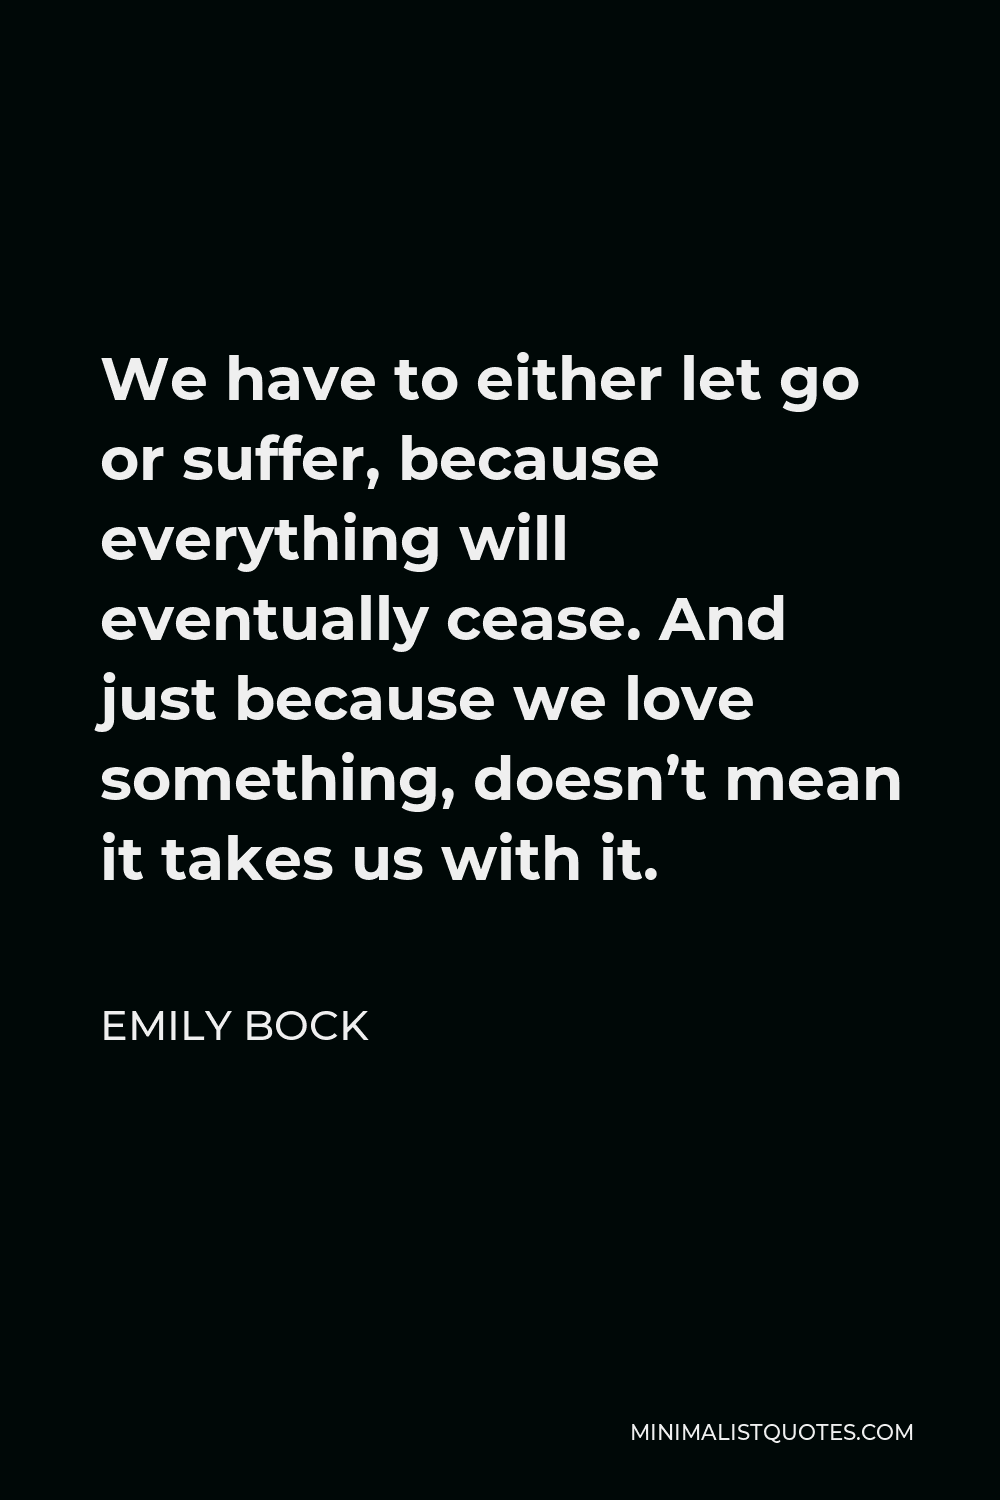 Emily Bock Quote - We have to either let go or suffer, because everything will eventually cease. And just because we love something, doesn’t mean it takes us with it.